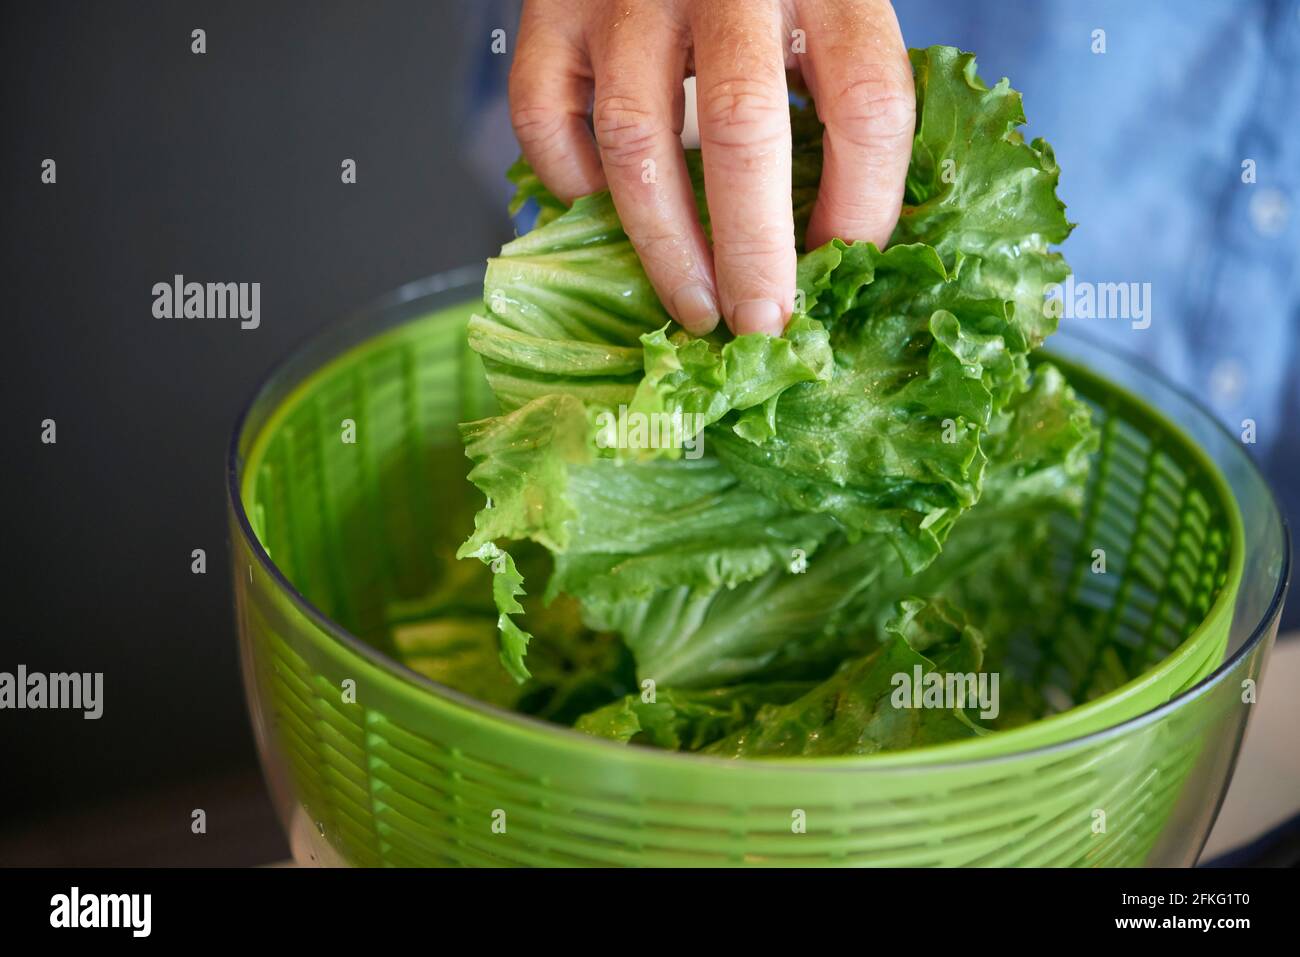 WomanÕs hand reaching for lettuce from salad spinner Stock Photo